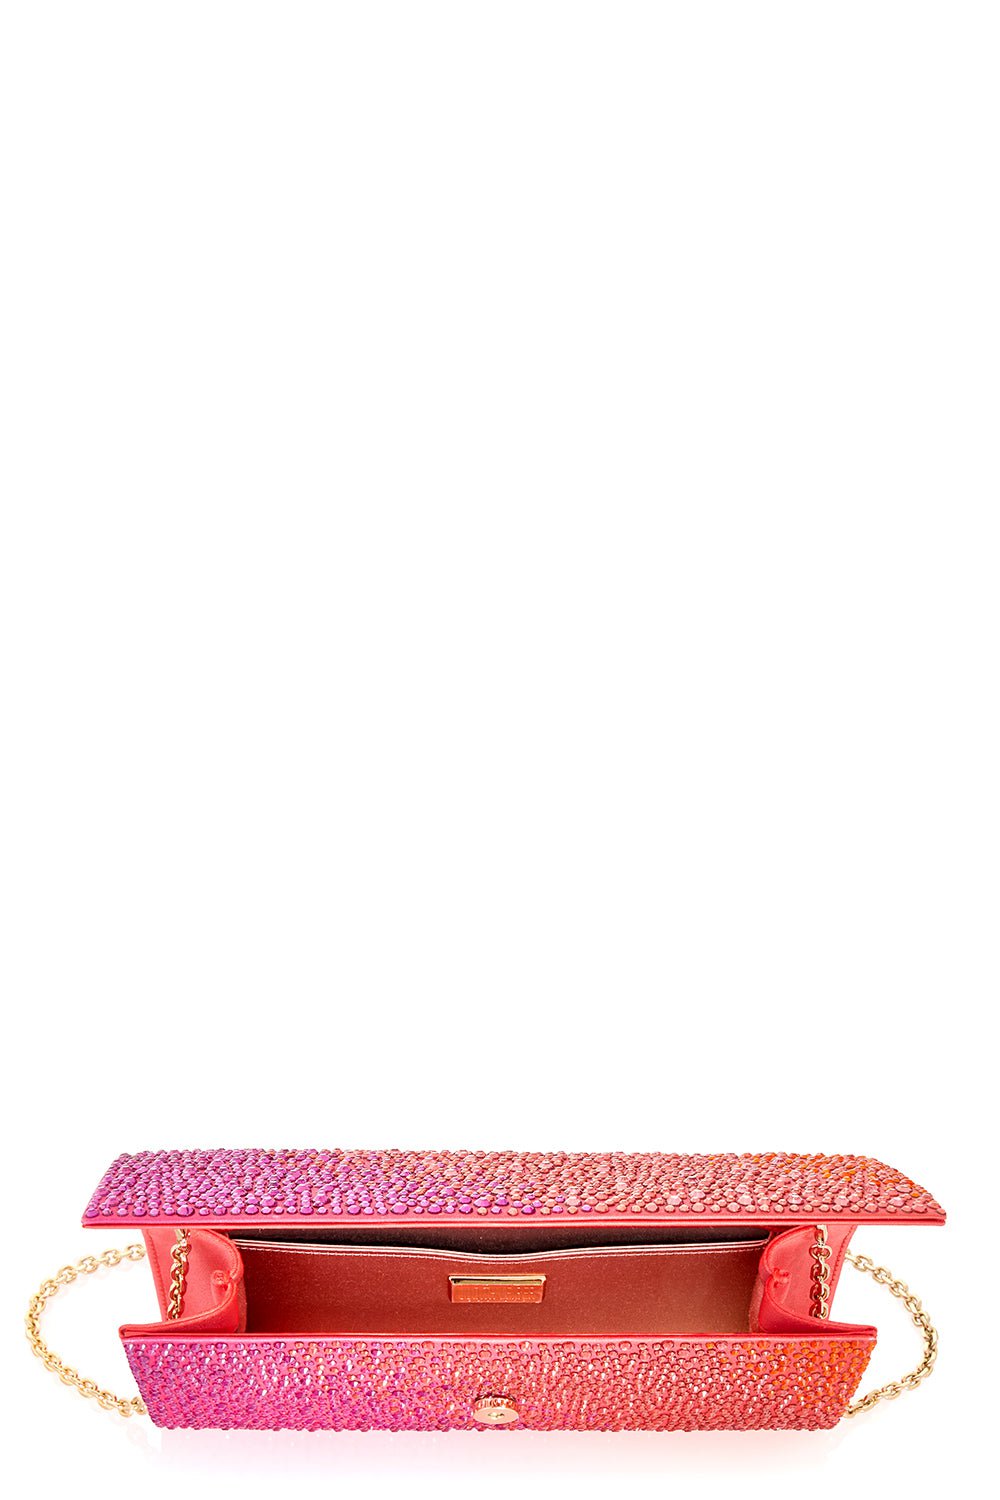 JUDITH LEIBER-Perry Crystal Caviar Clutch-CHAMPAGNE FLAME